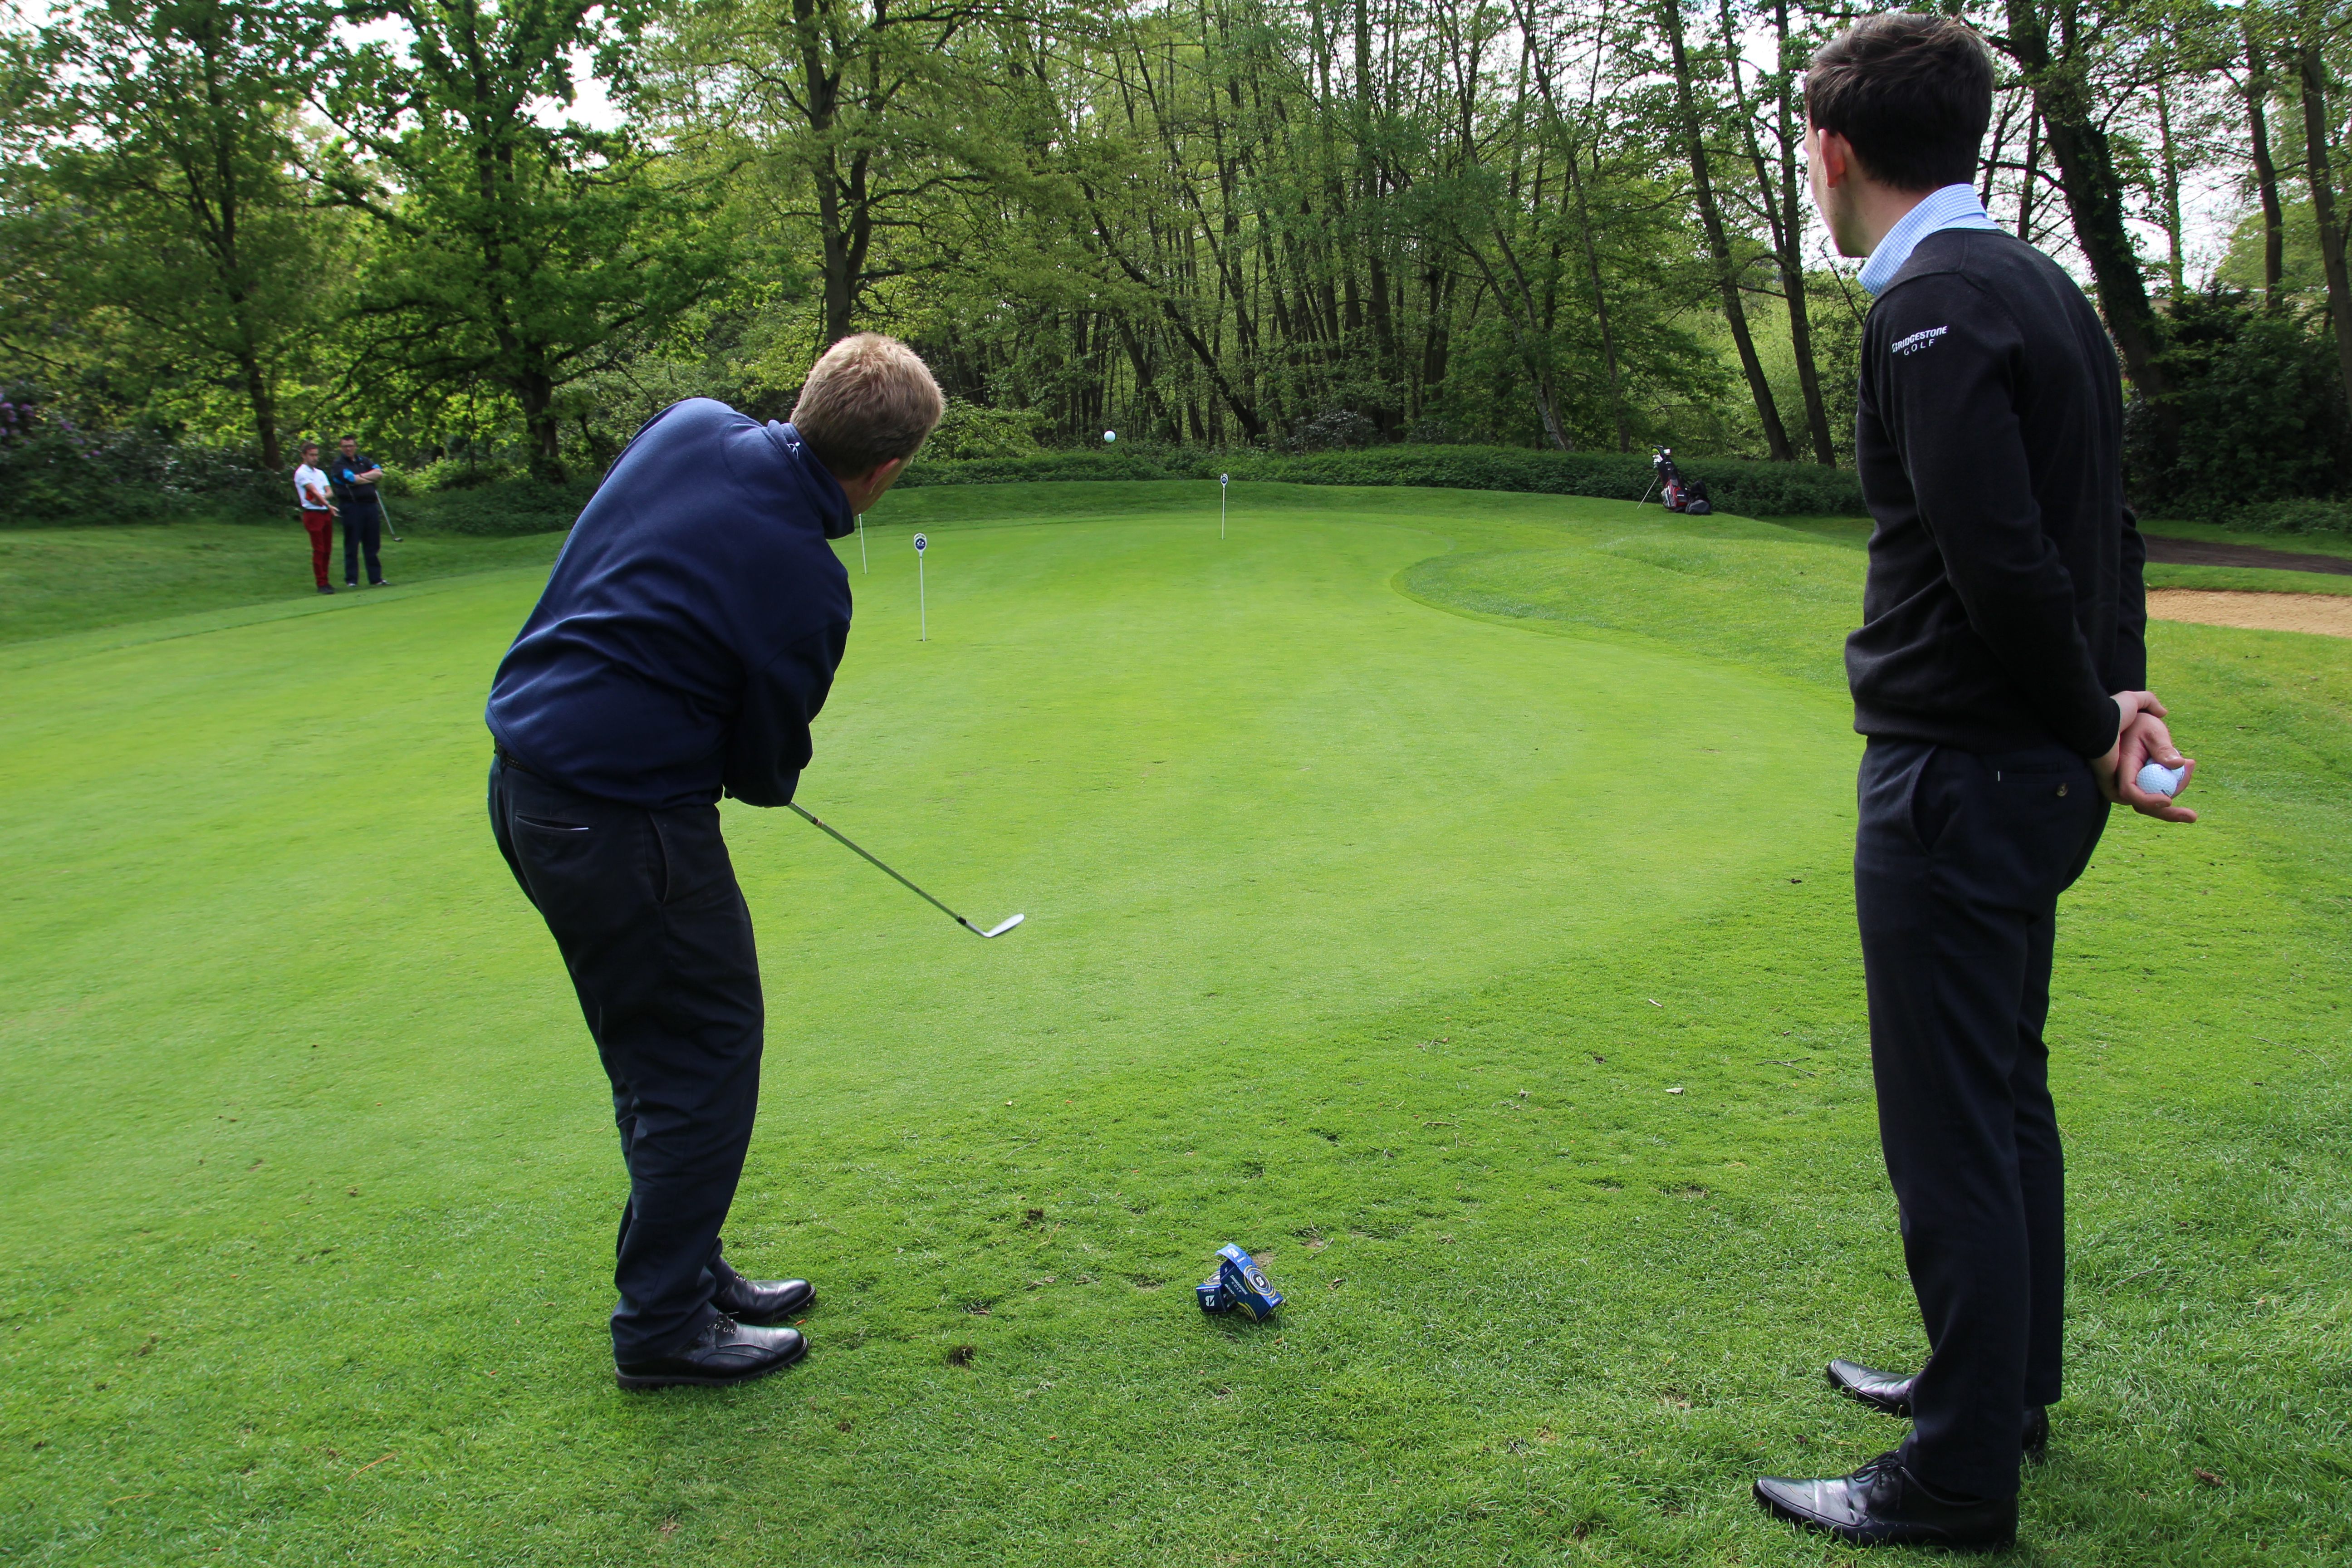 GolfMagic reader Carey Ashworth tests out his short game with the B330-S